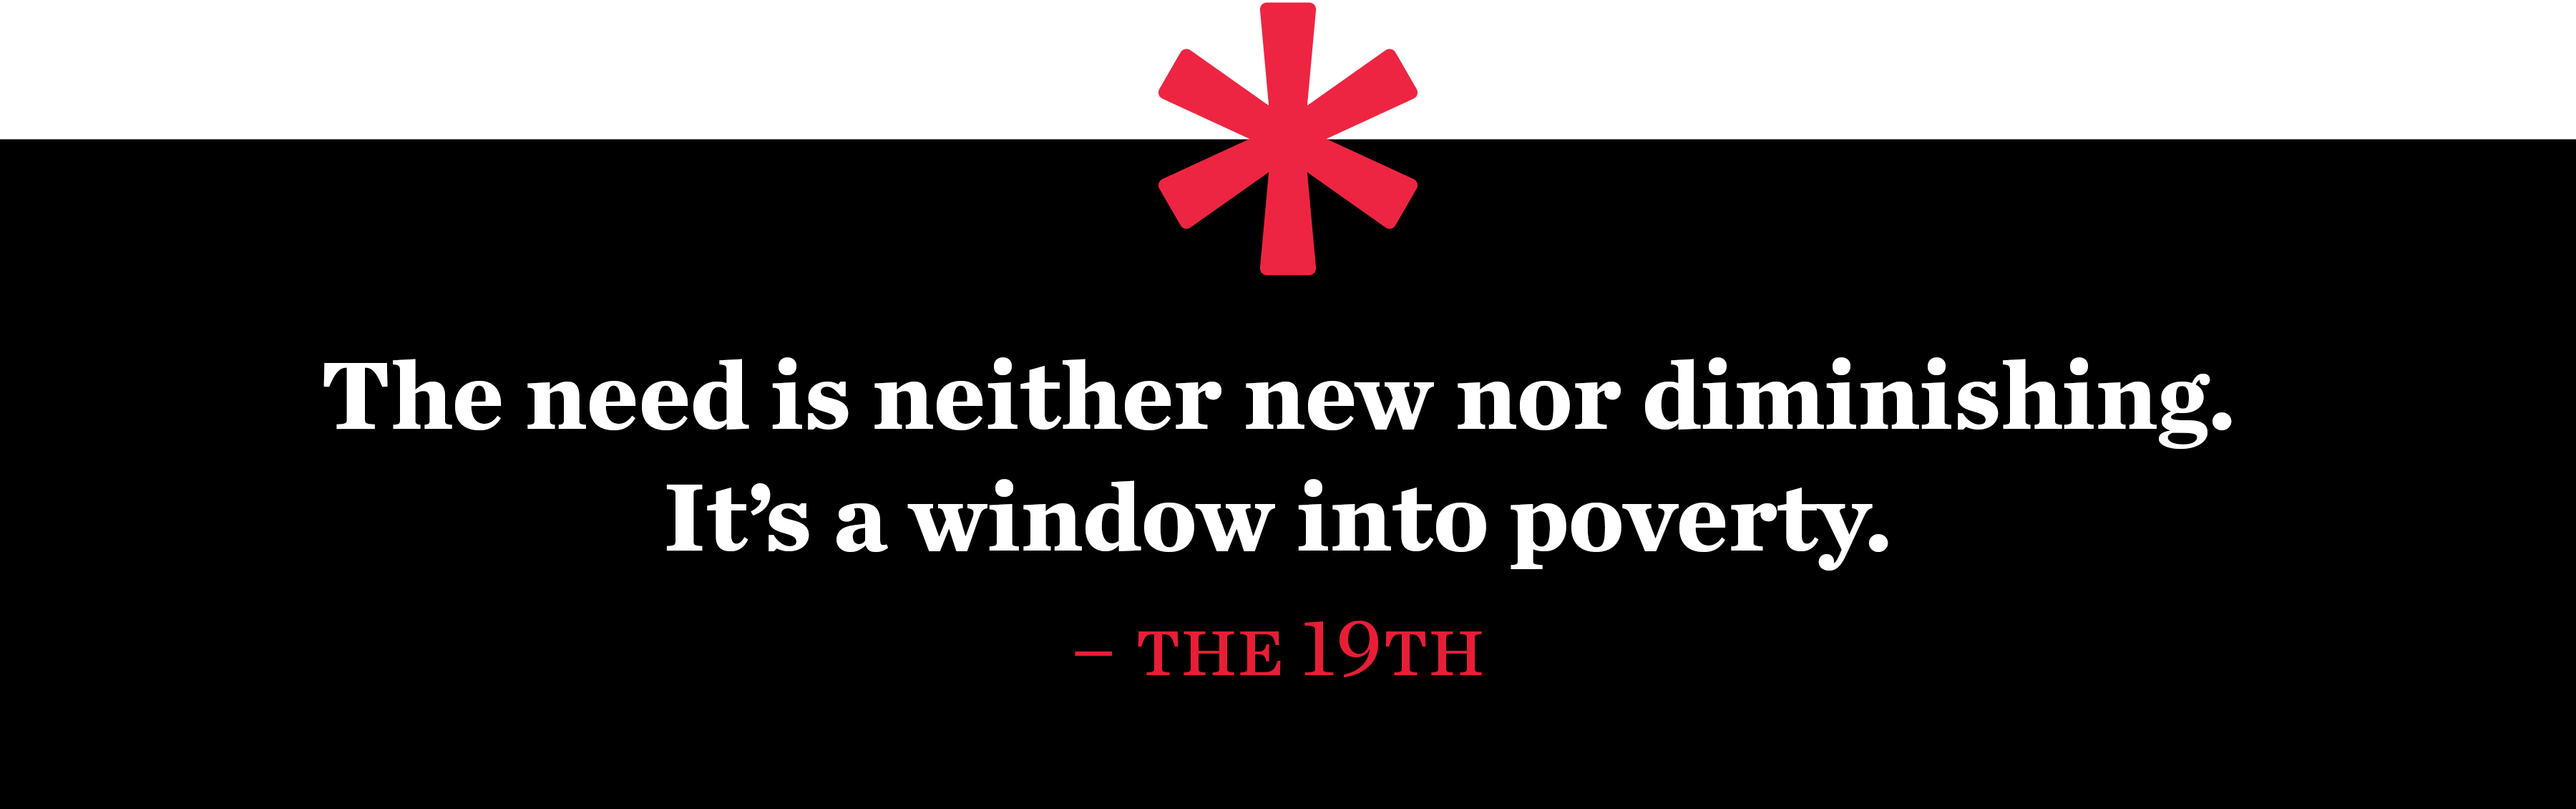 The need is neither new nor diminishing. It's a window into poverty. (The 19th)